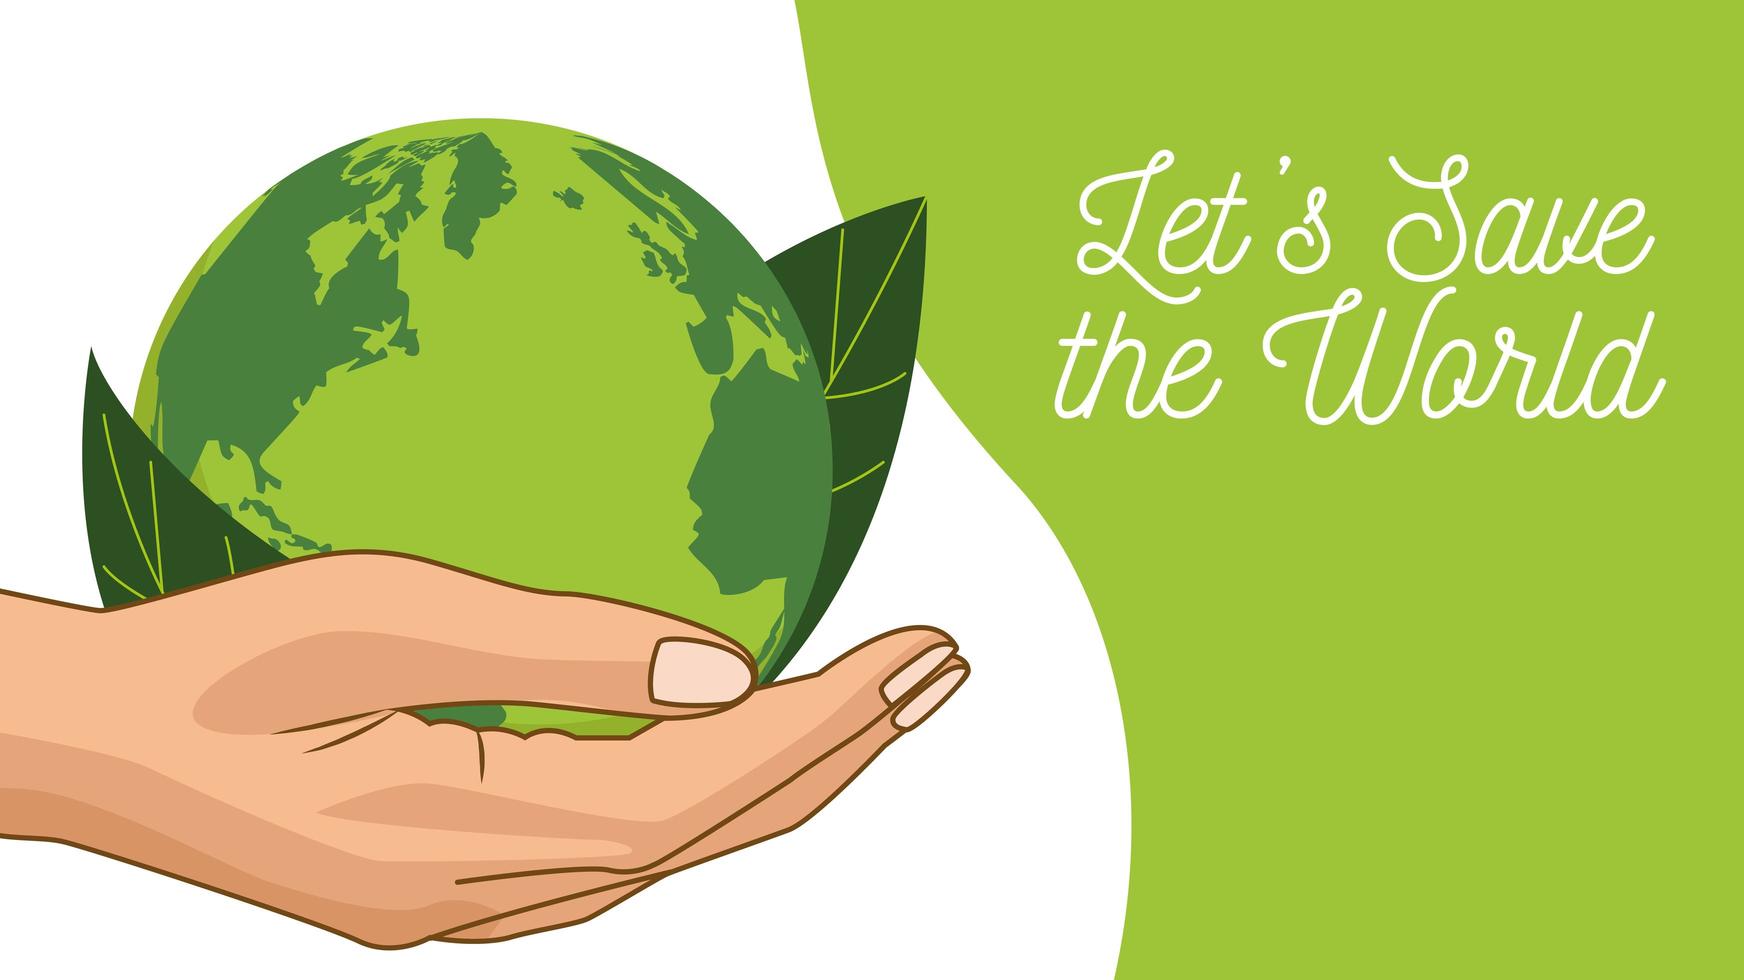 save the world environmental poster with hand lifting earth planet vector